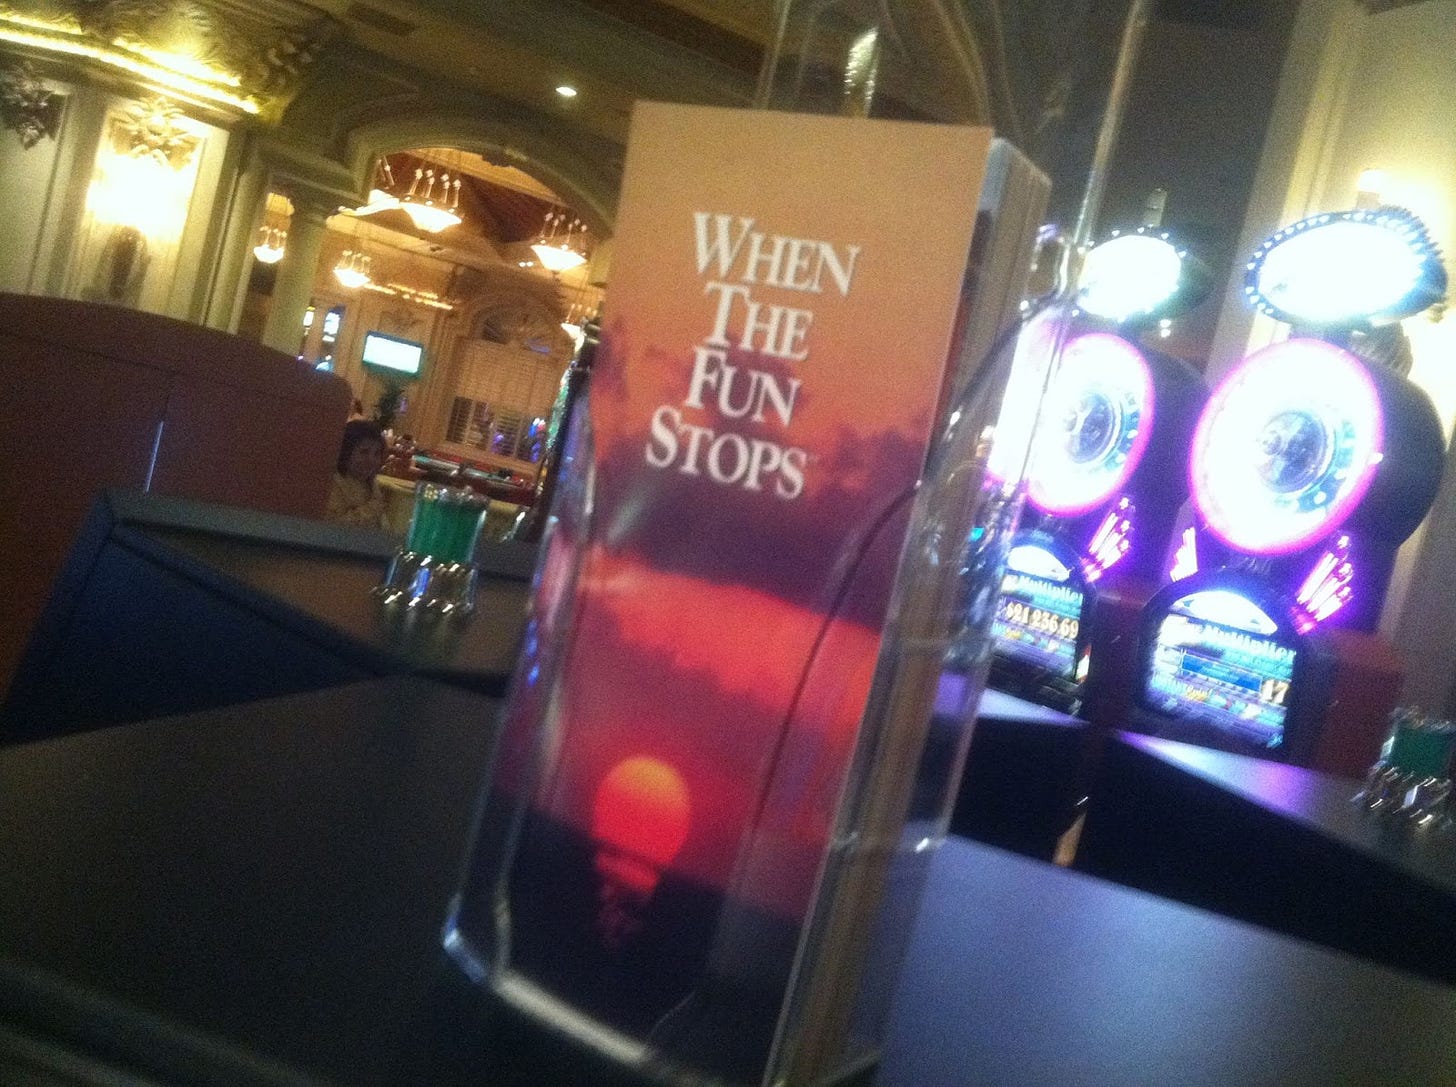 A picture I took at a casino in Vegas of a container of brochures entitled WHEN THE FUN STOPS on a table. Seriously it looks like a funeral parlor brochure